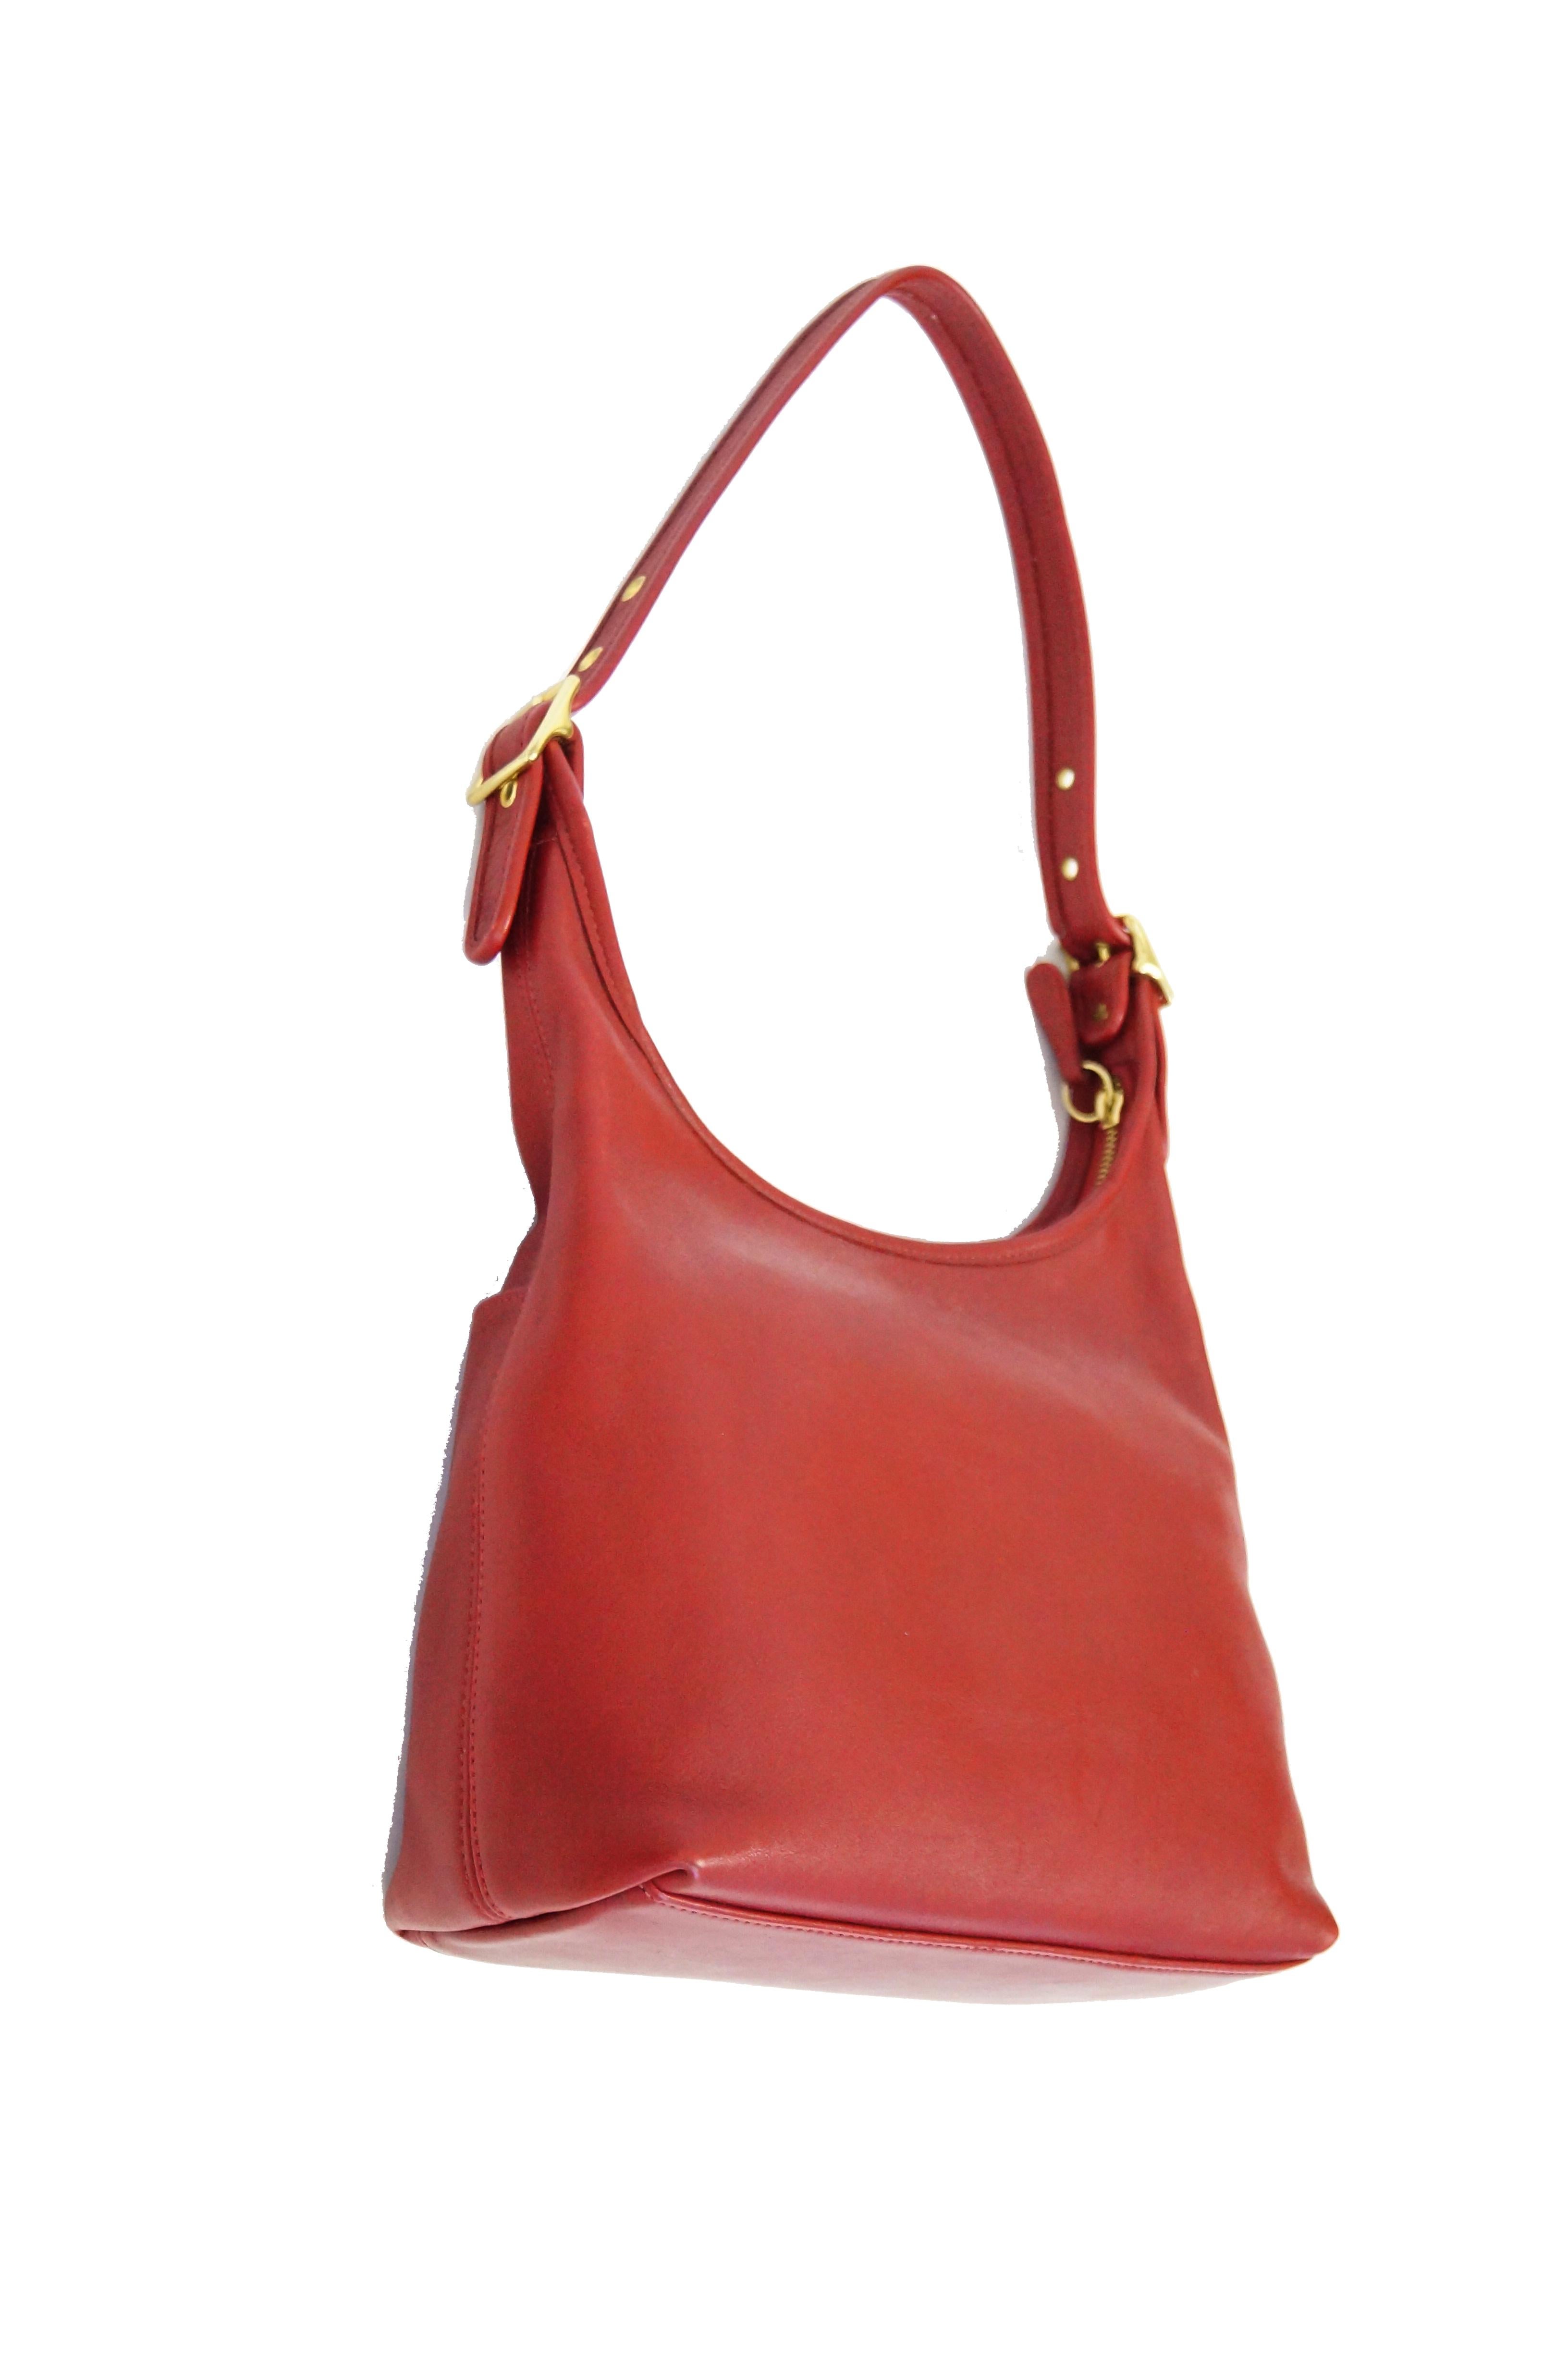  Early 2000's Bonnie Cashin Reproduction Coach Tomato Red Shoulder Bag In Good Condition For Sale In Houston, TX